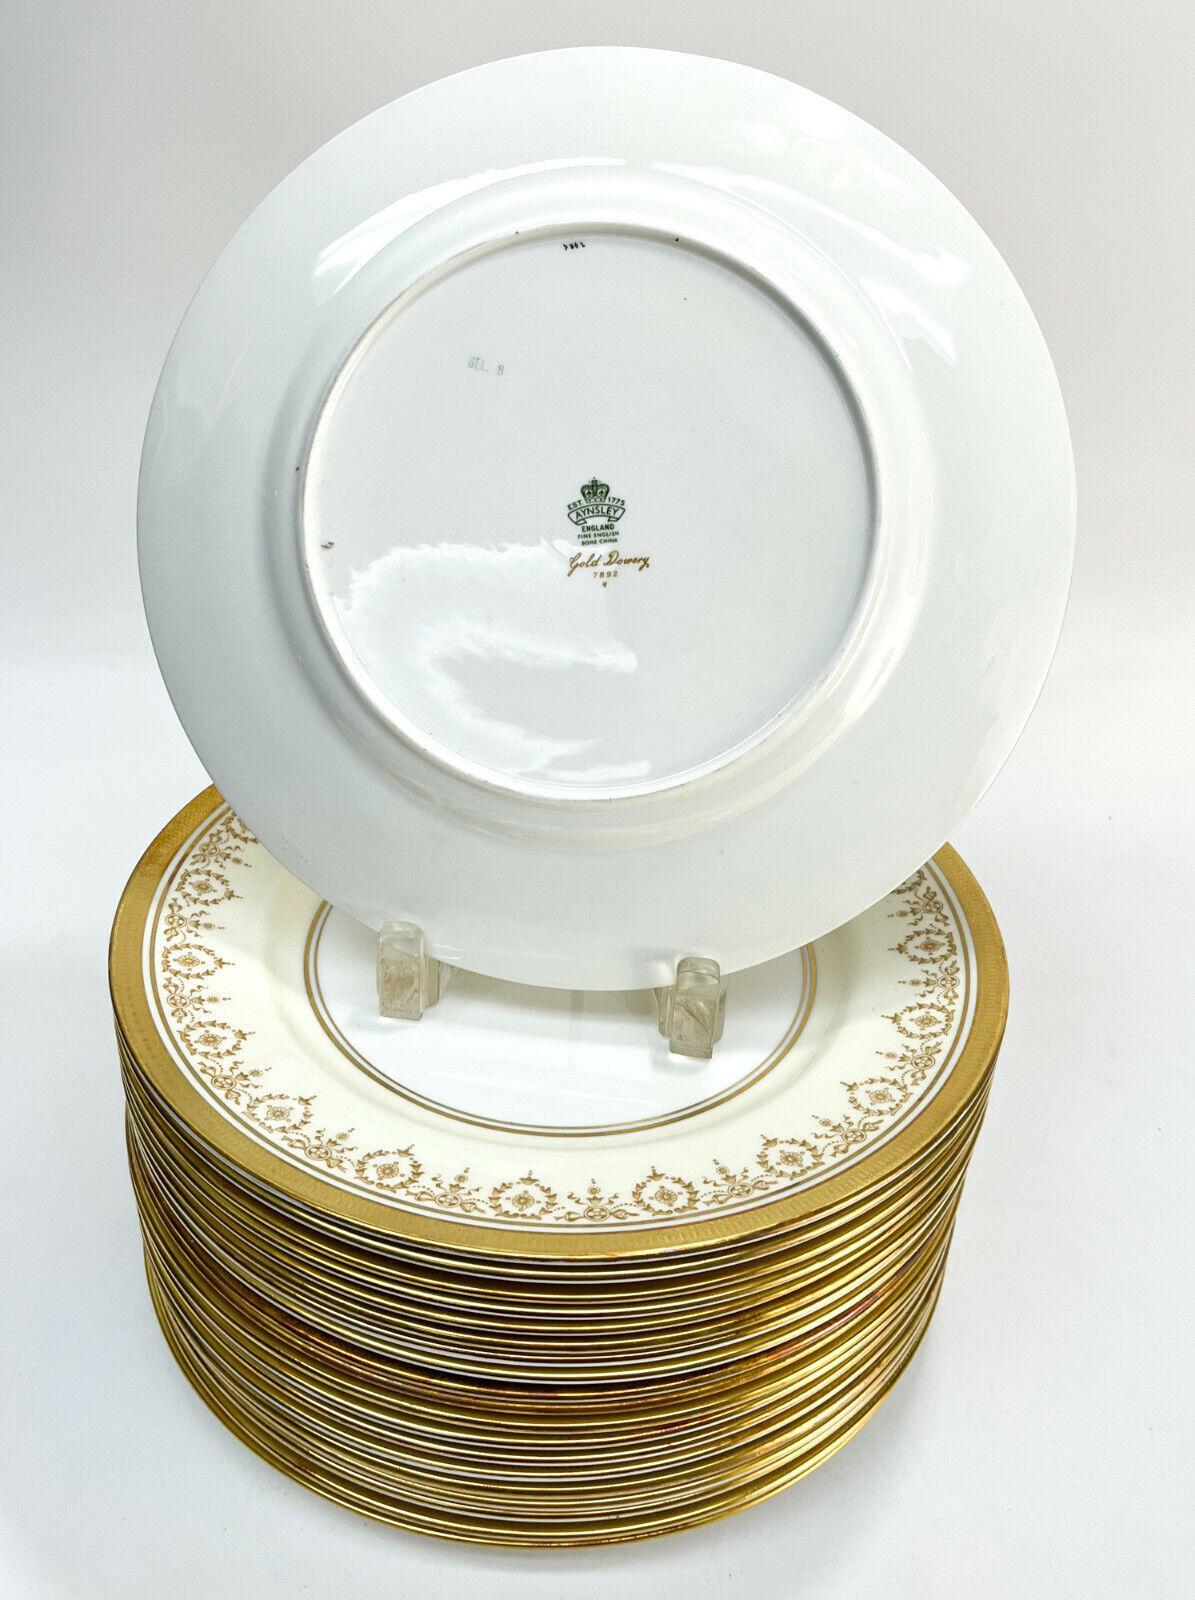 Set of 20 Aynsley England Porcelain Dinner Plates in Gold Dowery, circa 1960 In Good Condition For Sale In Gardena, CA